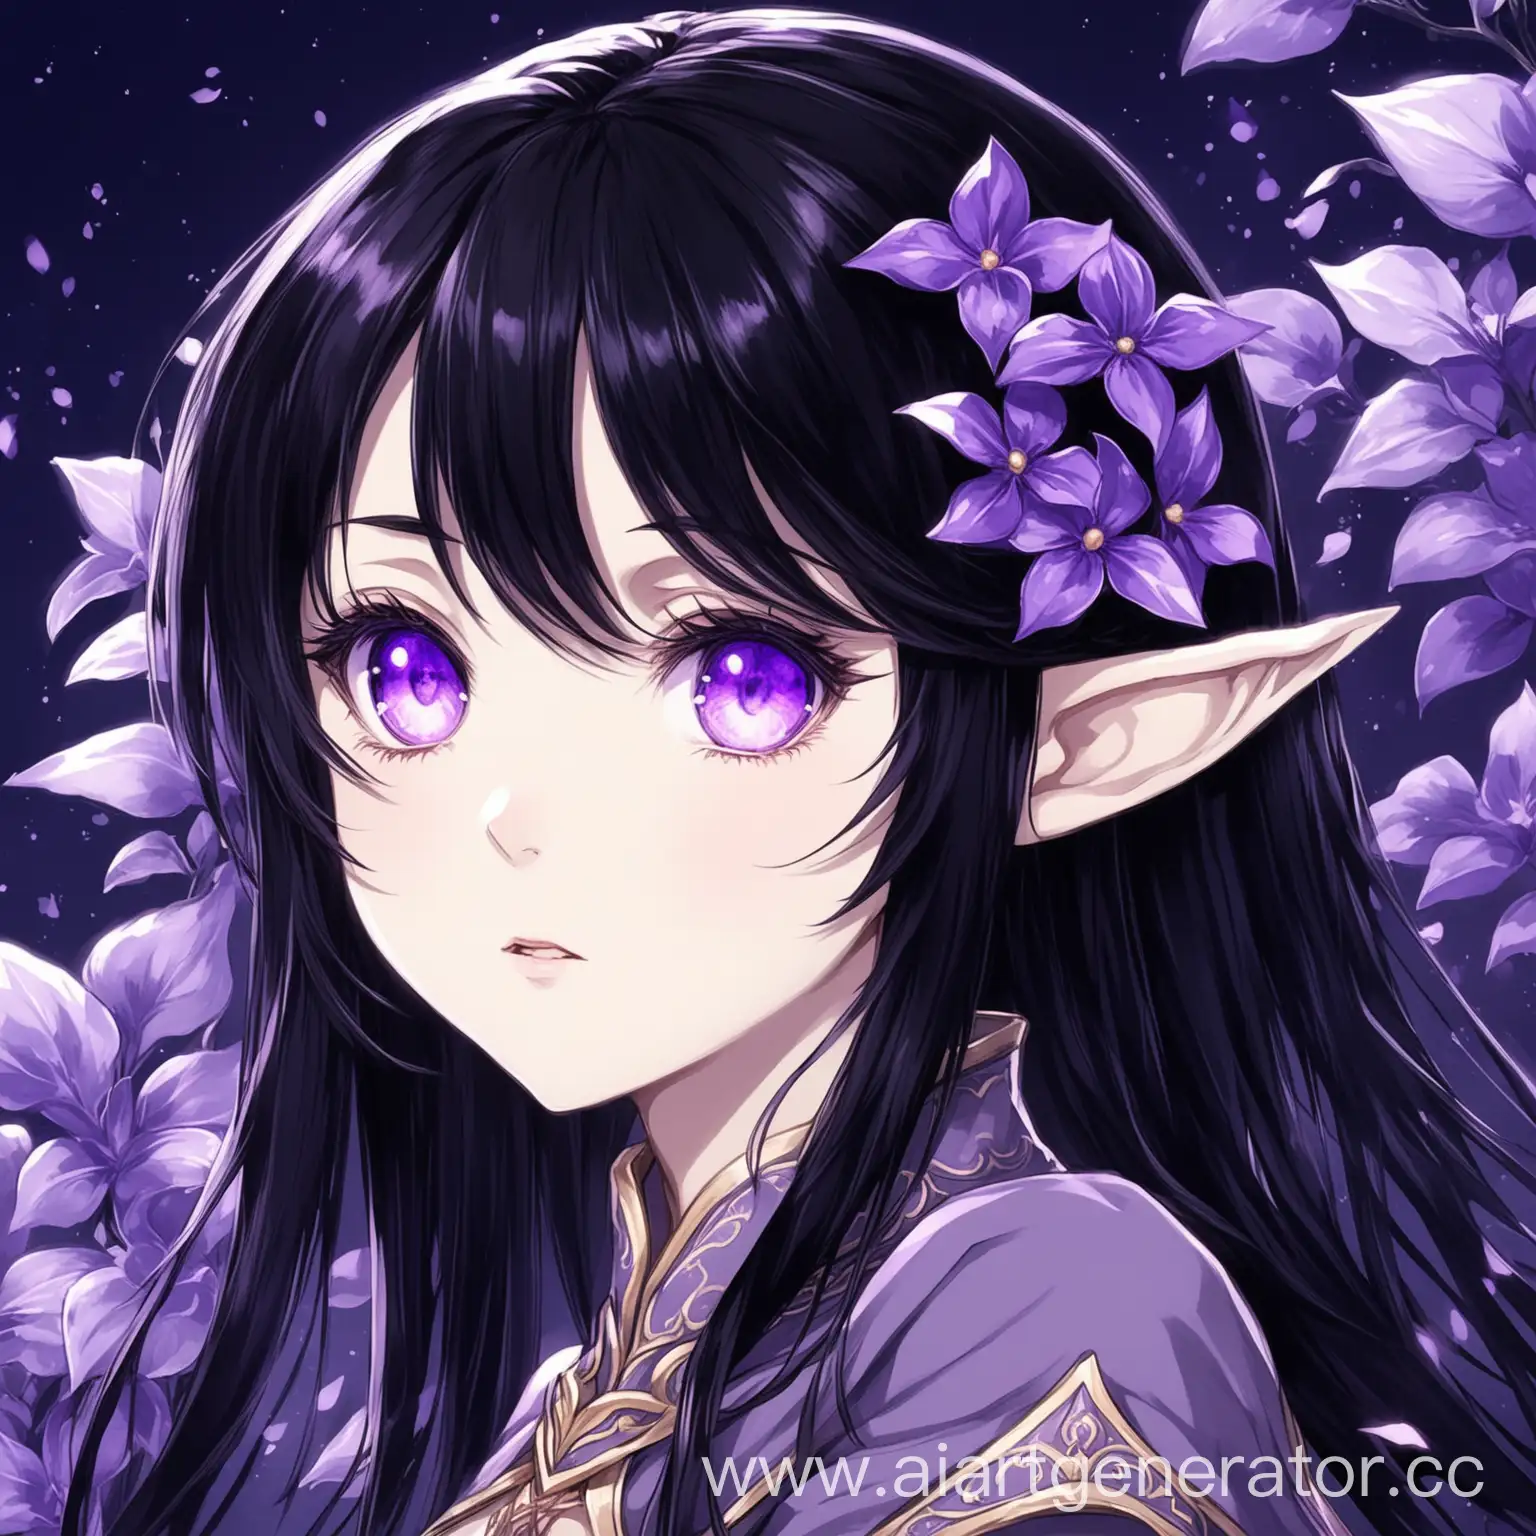 Enchanting-Anime-Elf-Girl-with-Black-Hair-and-Violet-Eyes